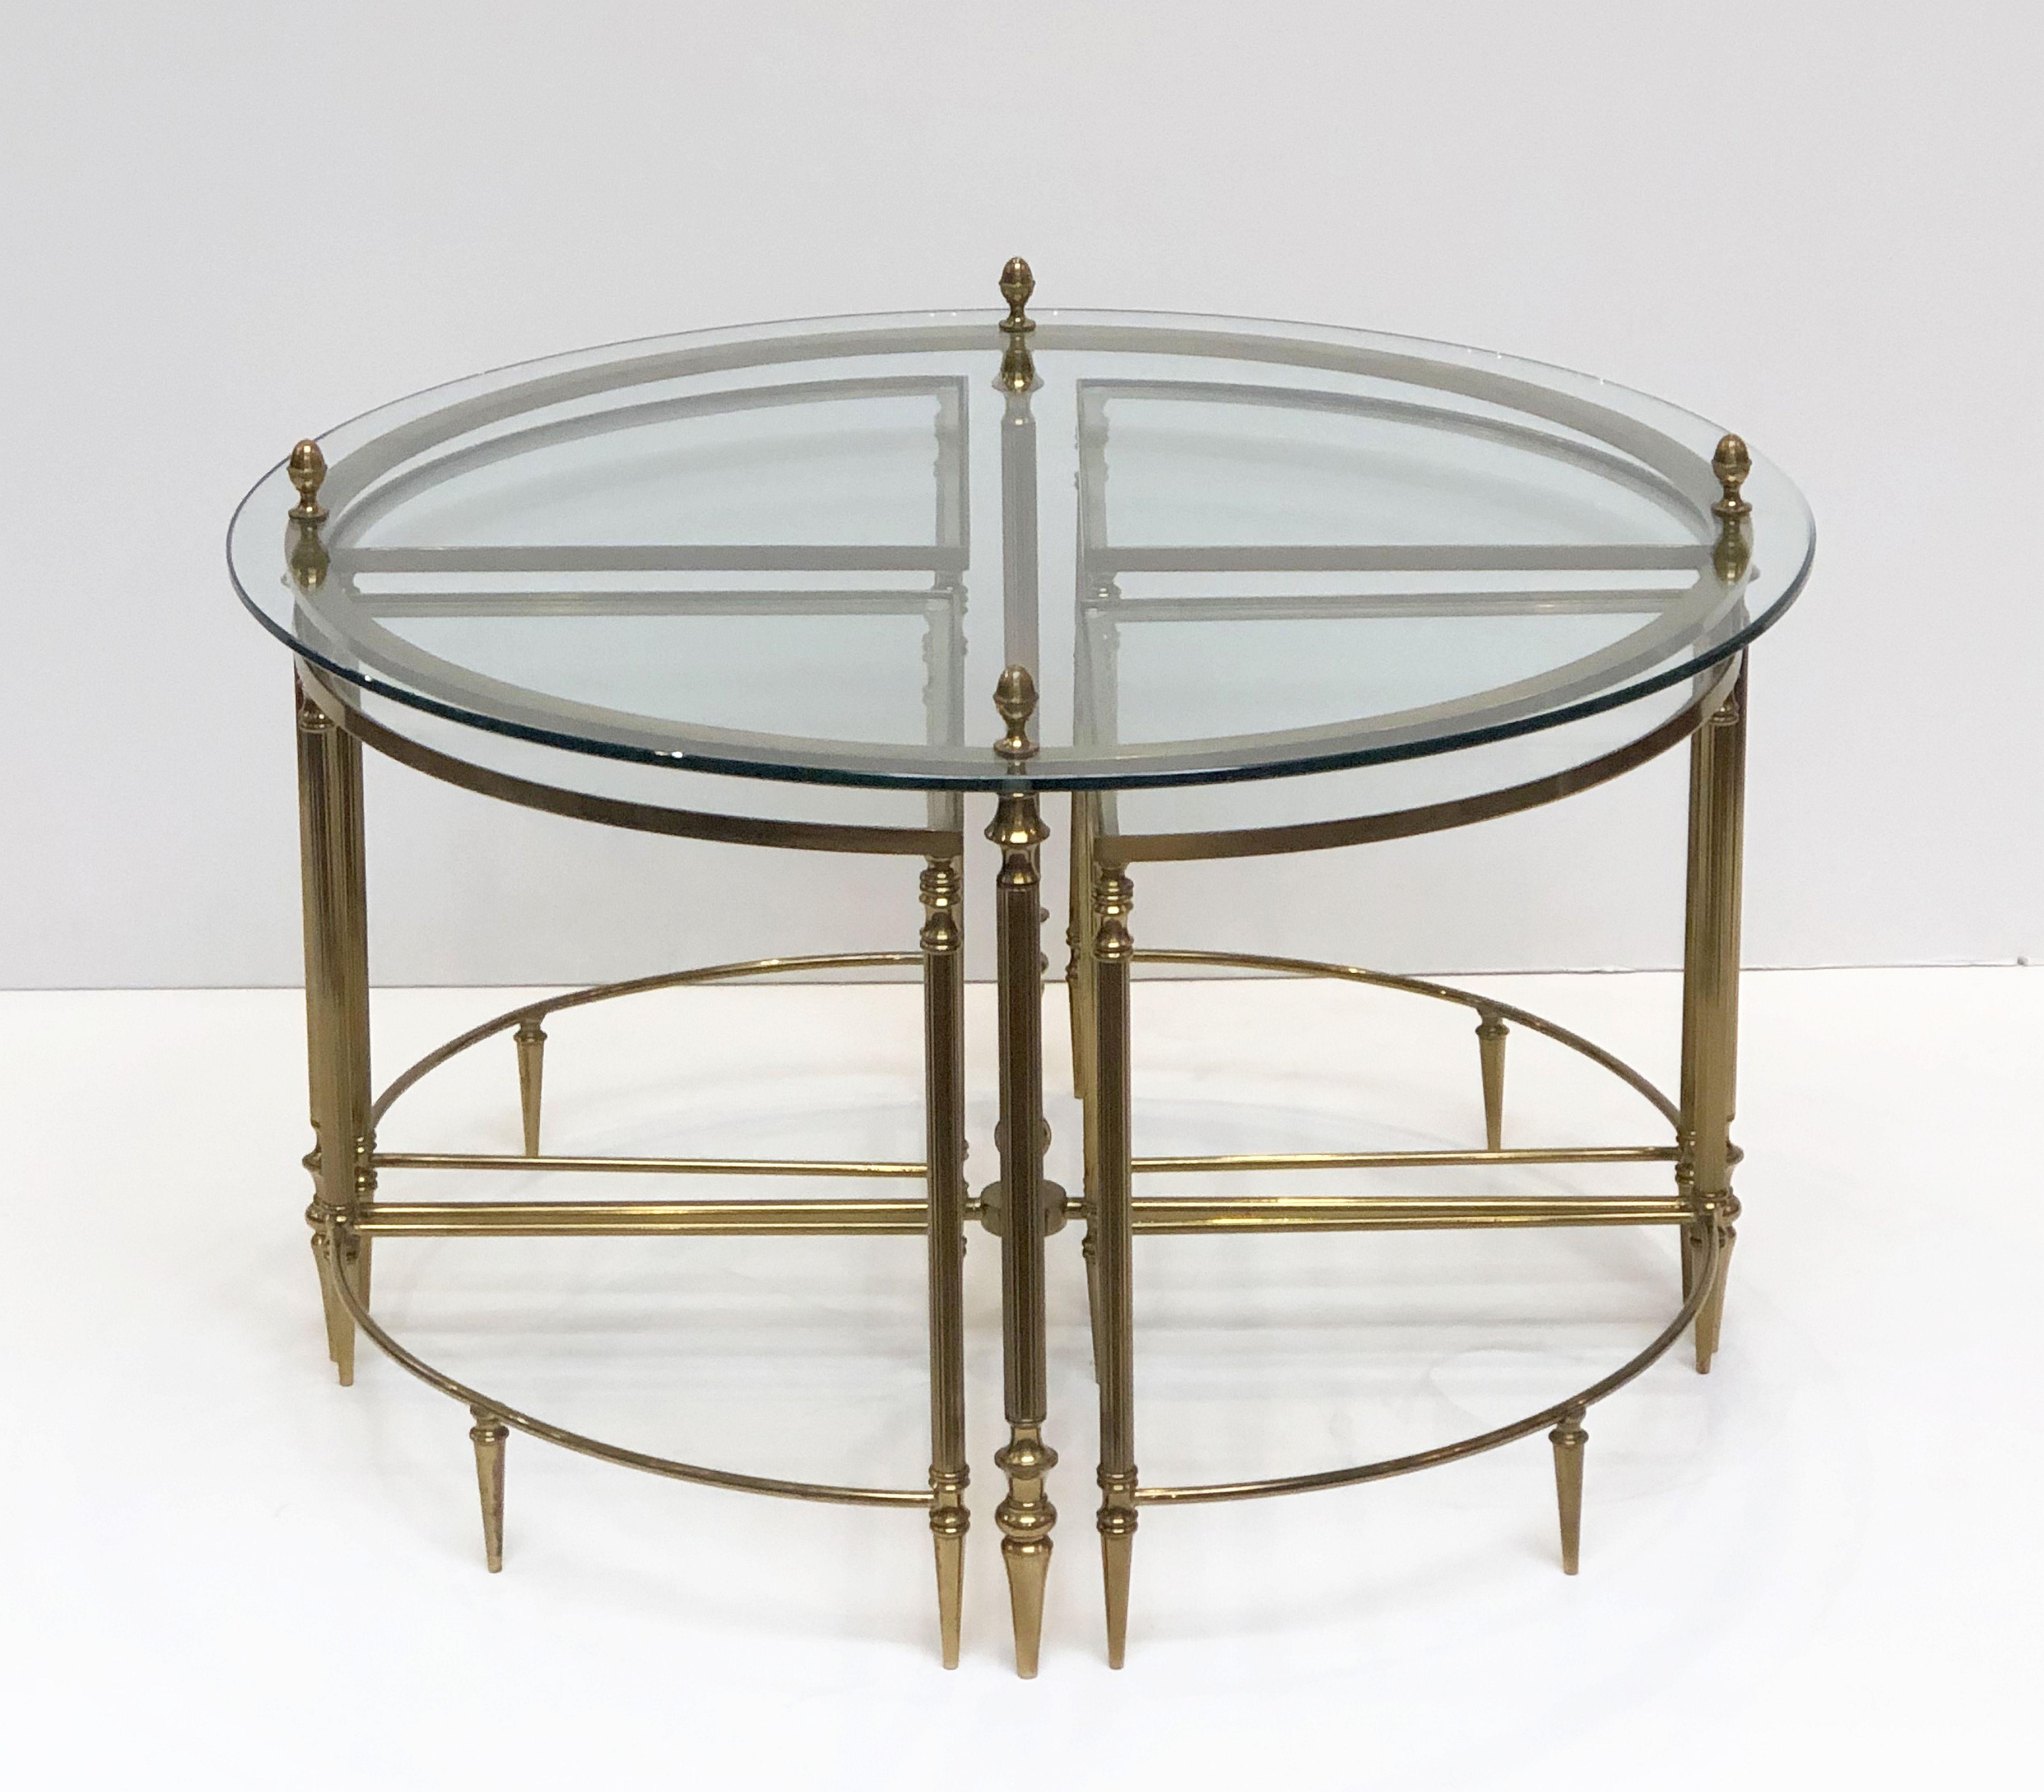 20th Century French Circular Glass and Brass Low Table with Four Wedge Nesting Under-Tables